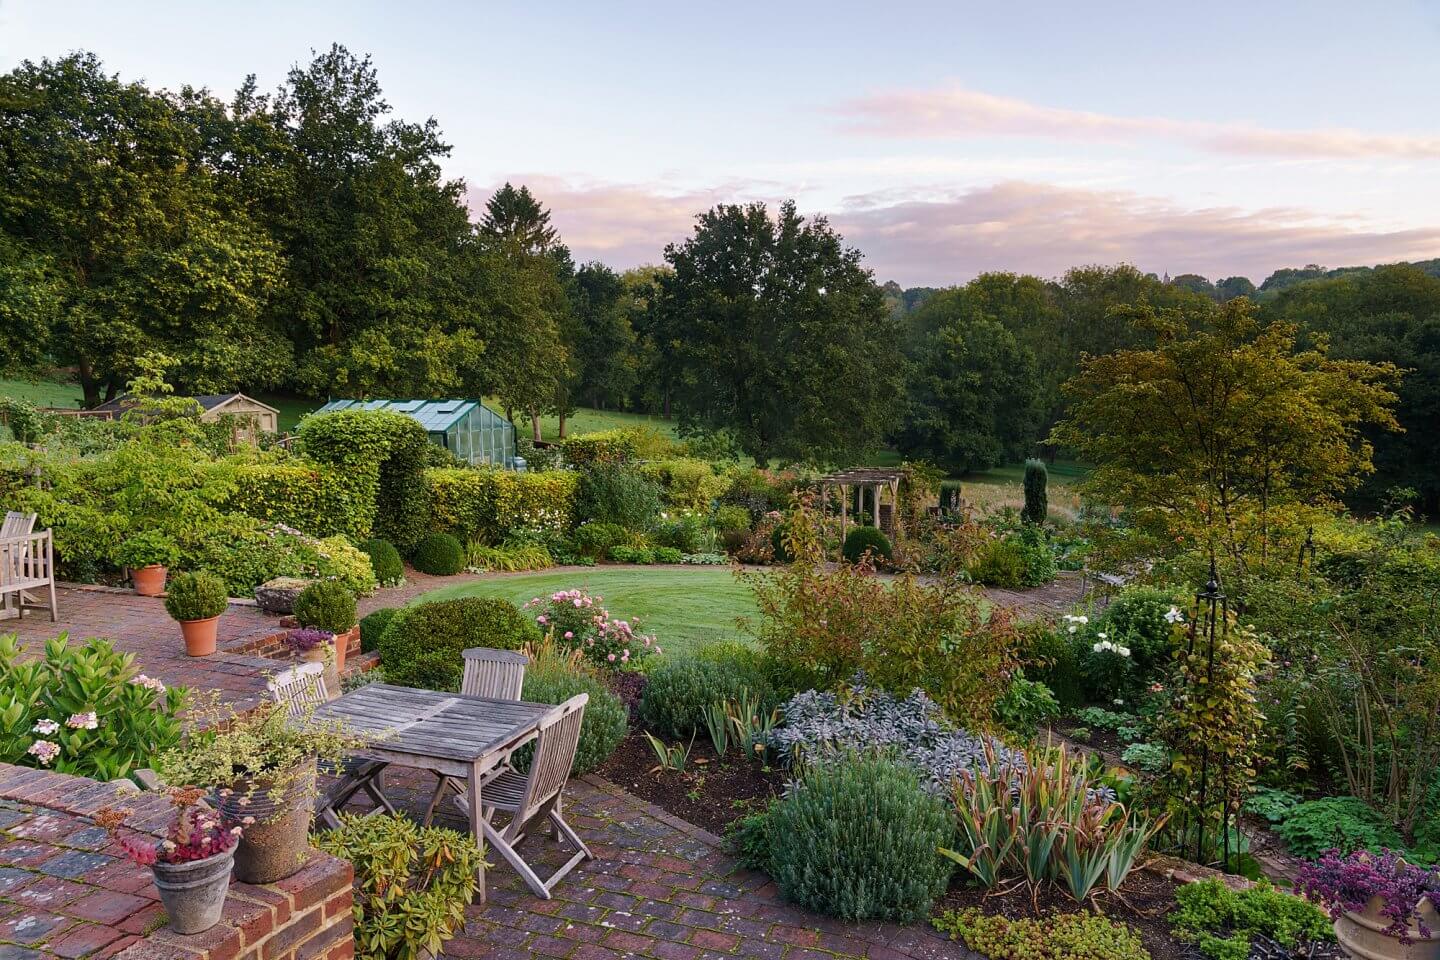 the English Garden magazine Surrey good life article lead image of private godalming garden at sunrise